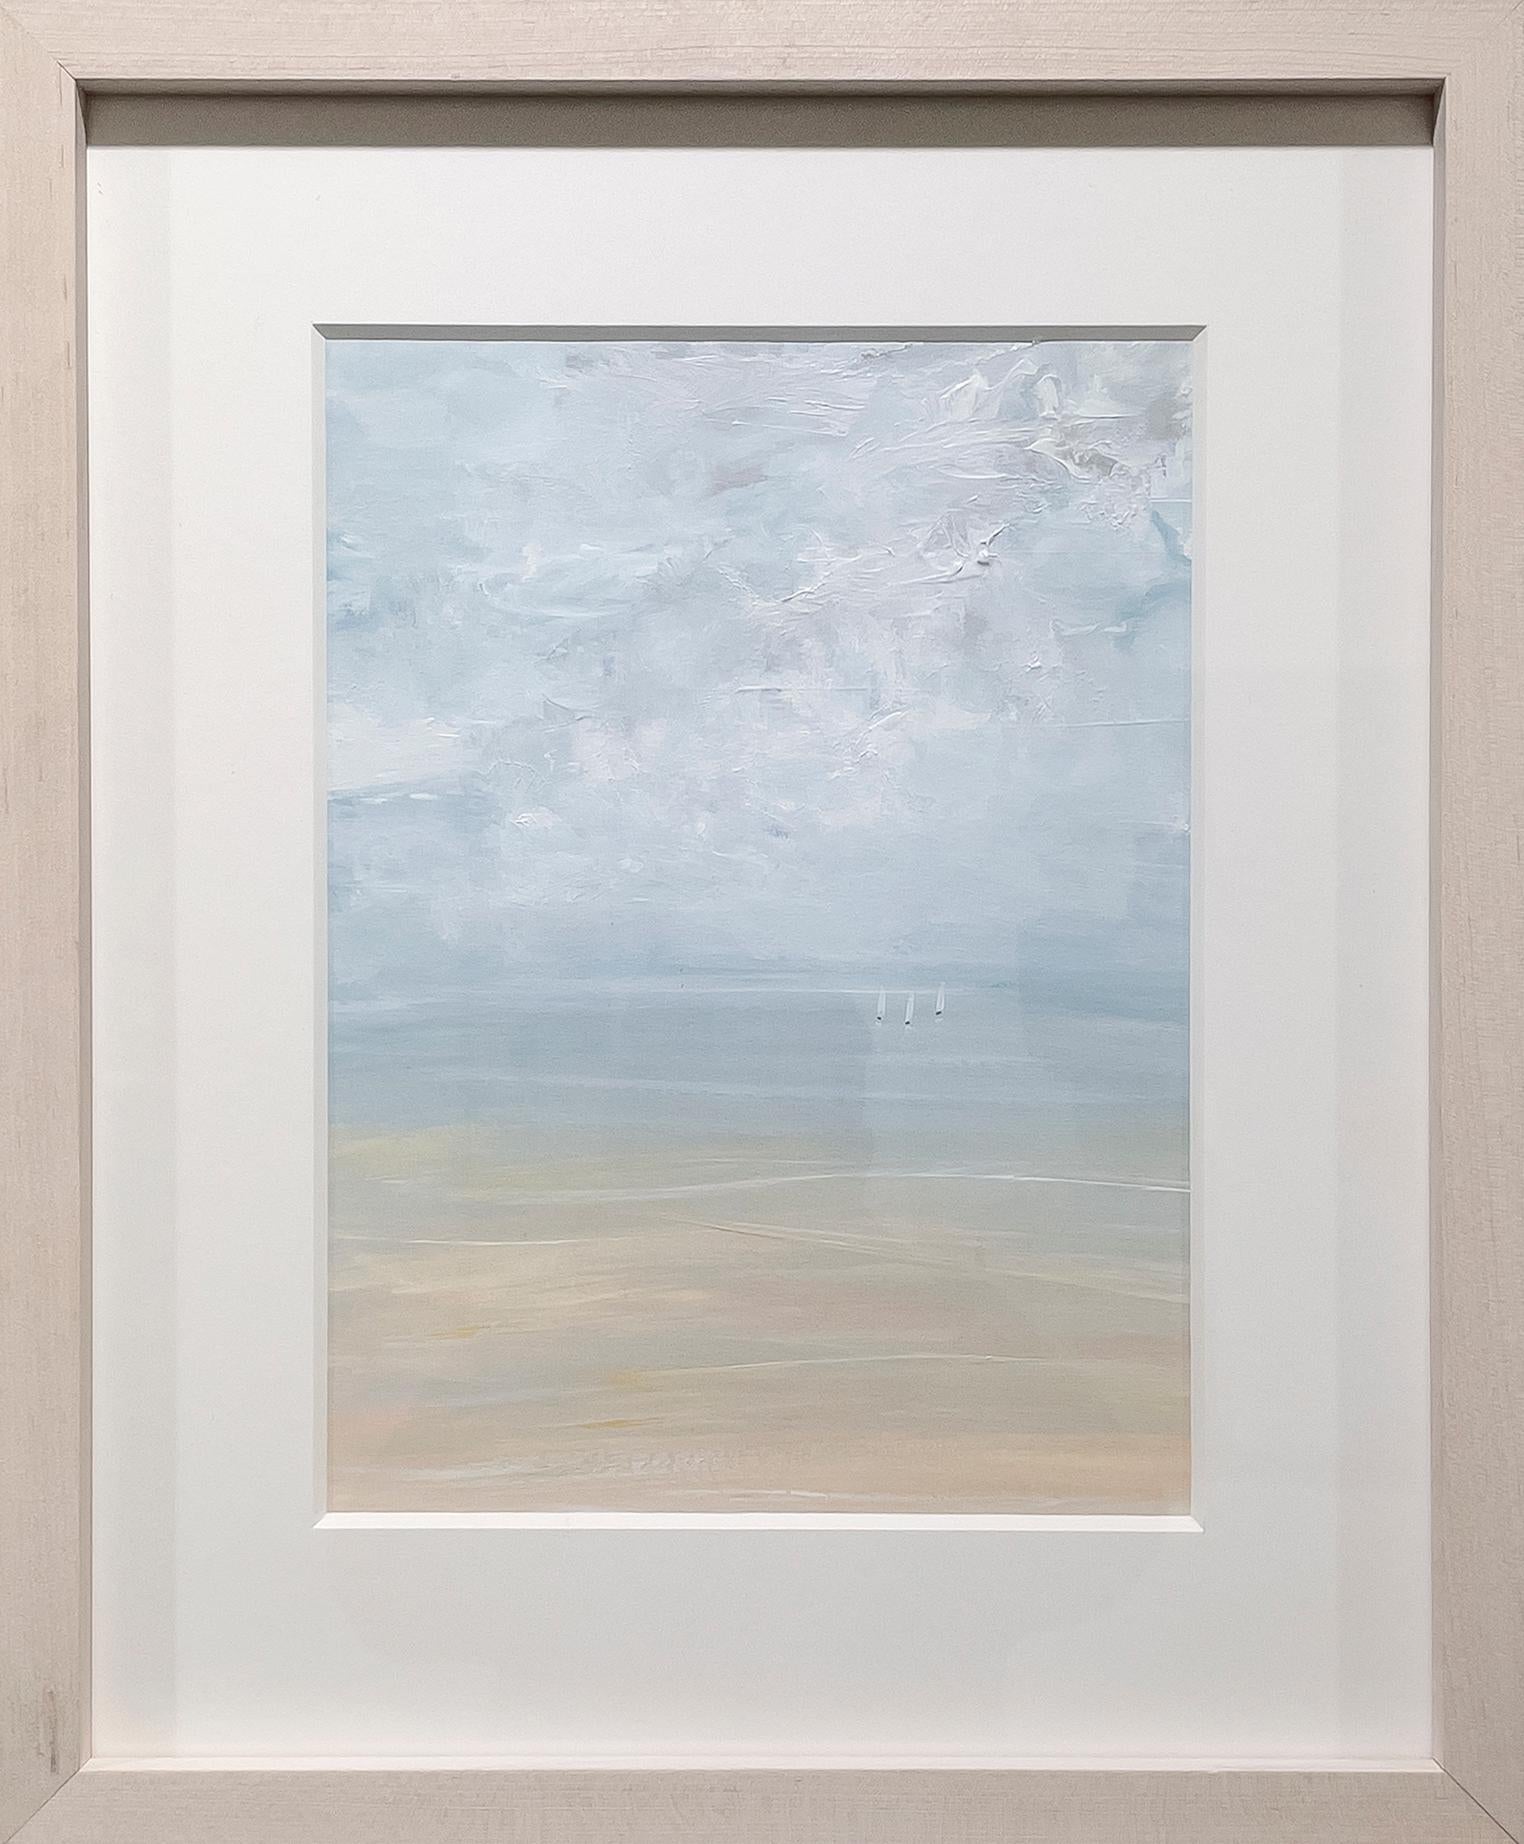 S. Cora Aldo Landscape Painting - "Early Morning, " Contemporary Seascape Painting